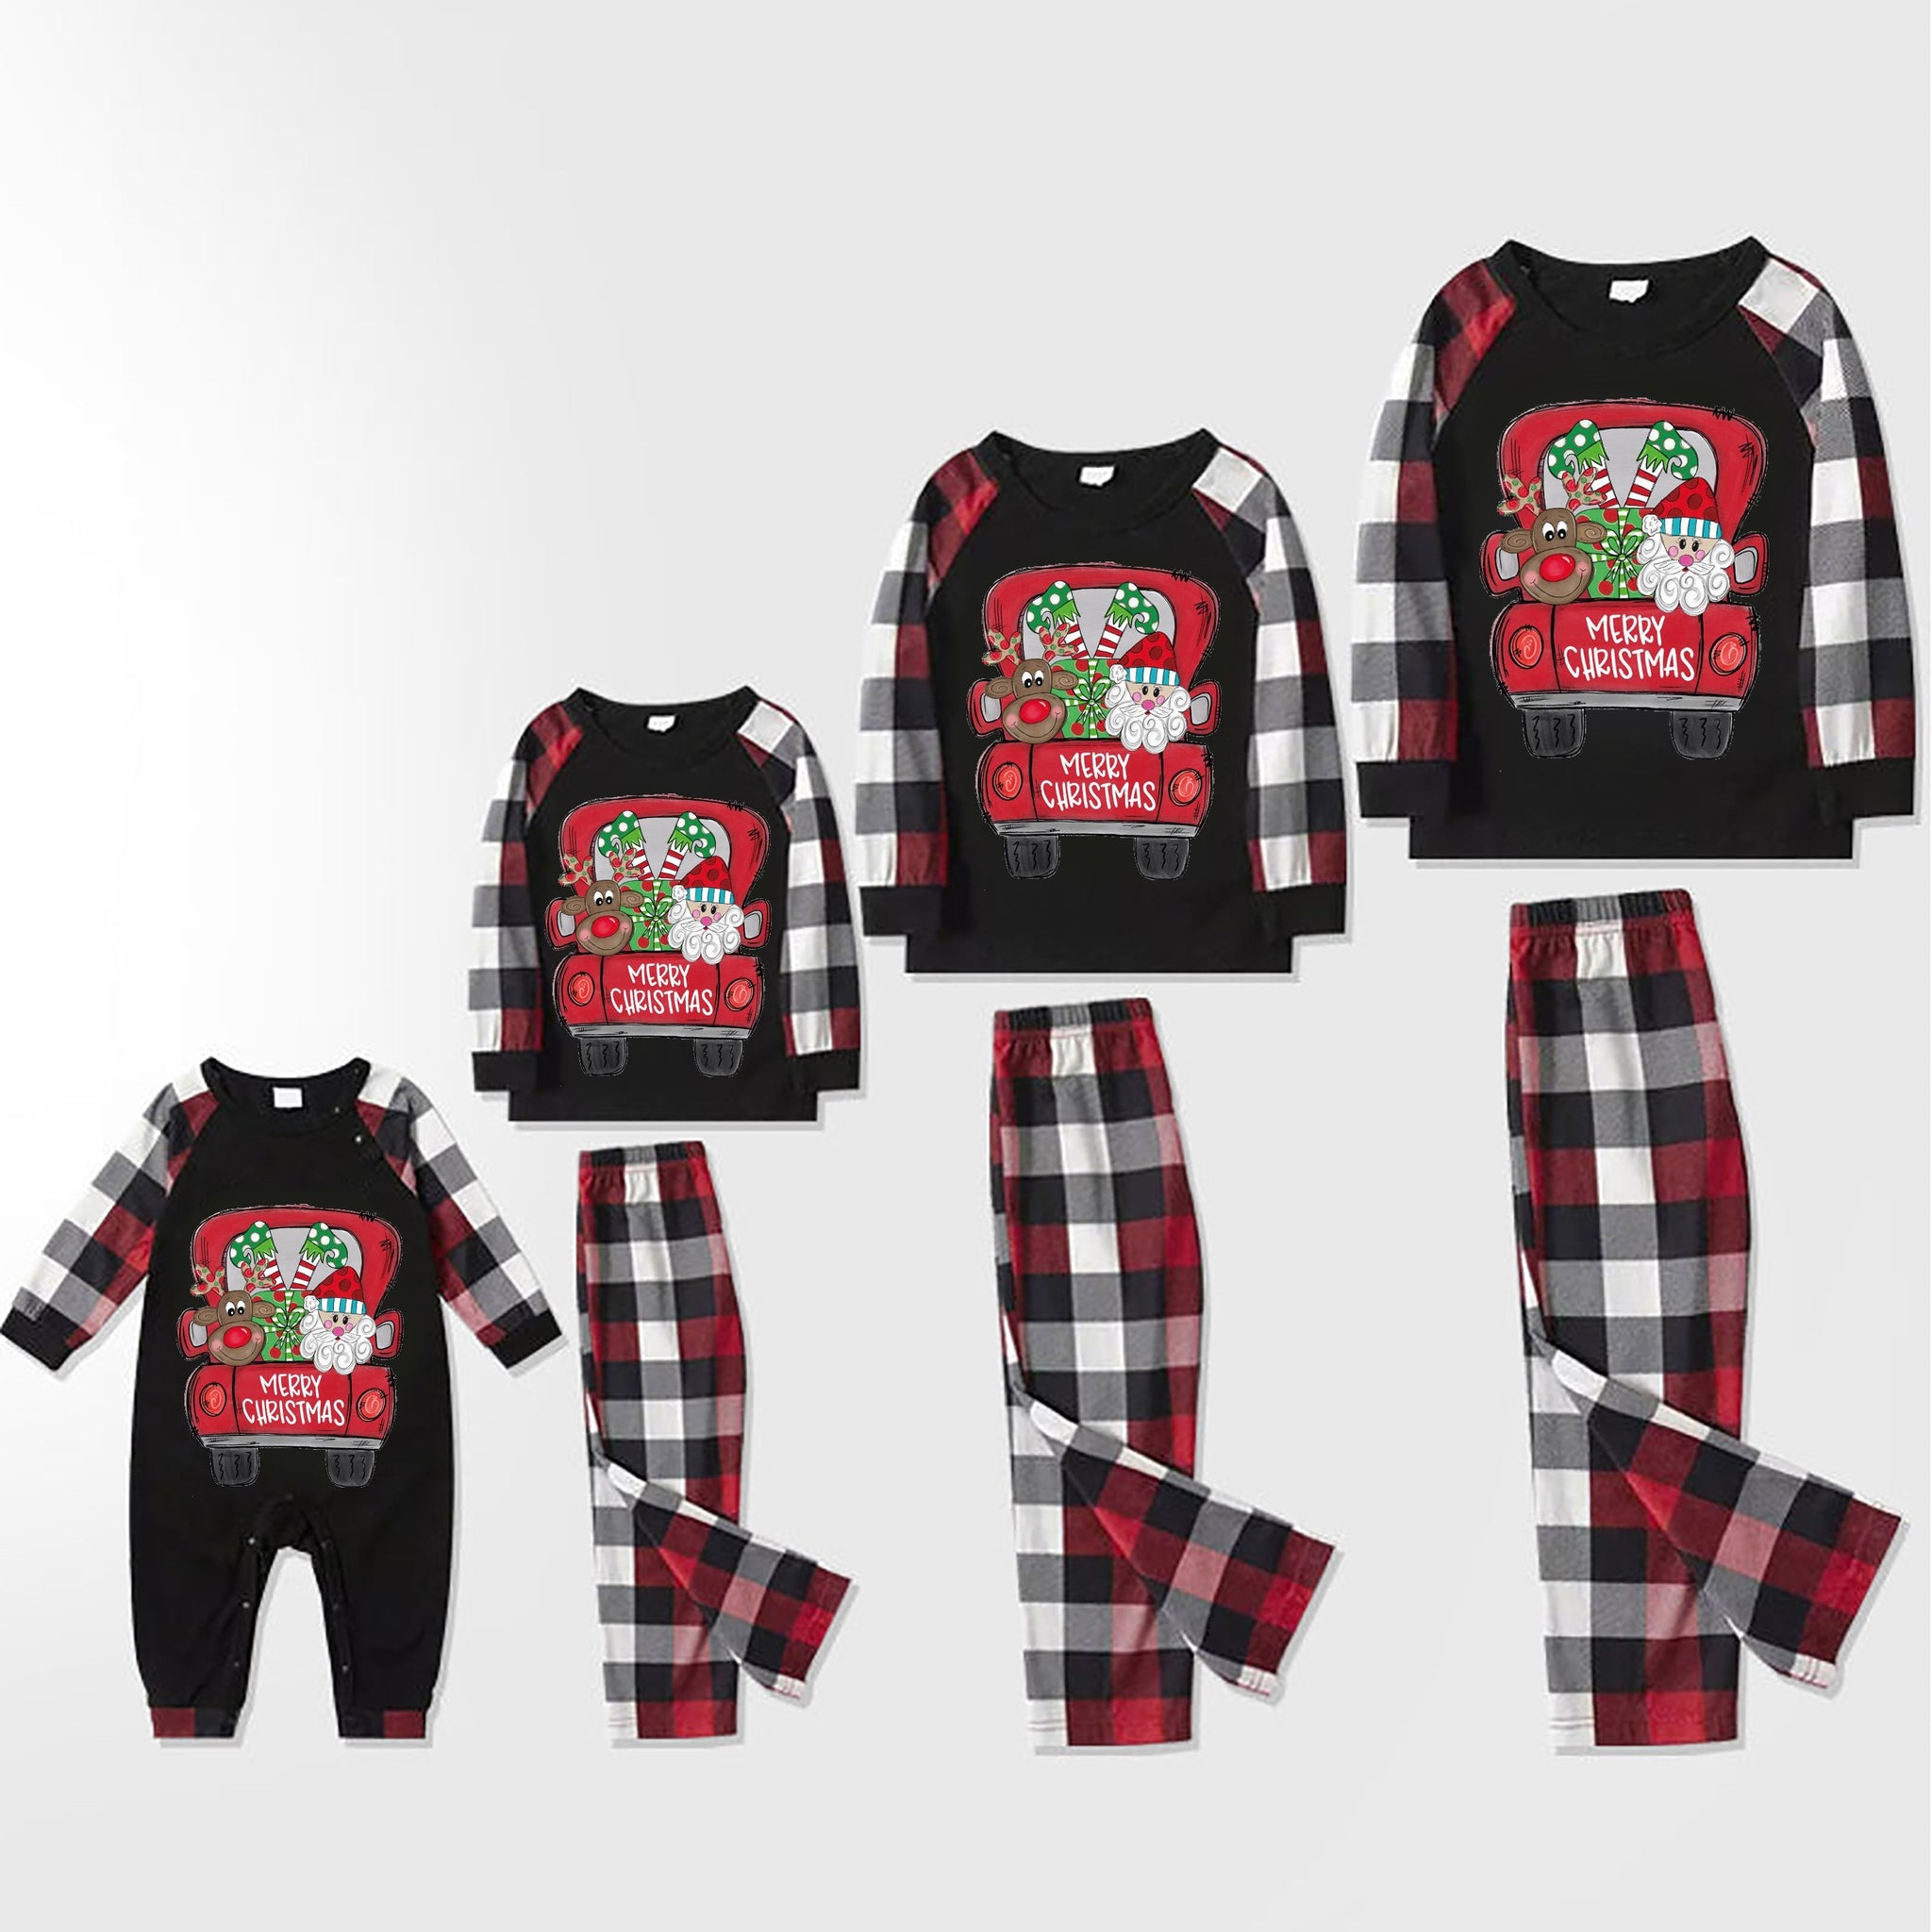 Christmas Cute Cartoon Santa Christmas Gift Truck Patterned and 'MERRY CHRISTMAS  ' Letter Print Contrast Tops and Red & Black & White Plaid Pants Family Matching Pajamas Set With Dog Bandana